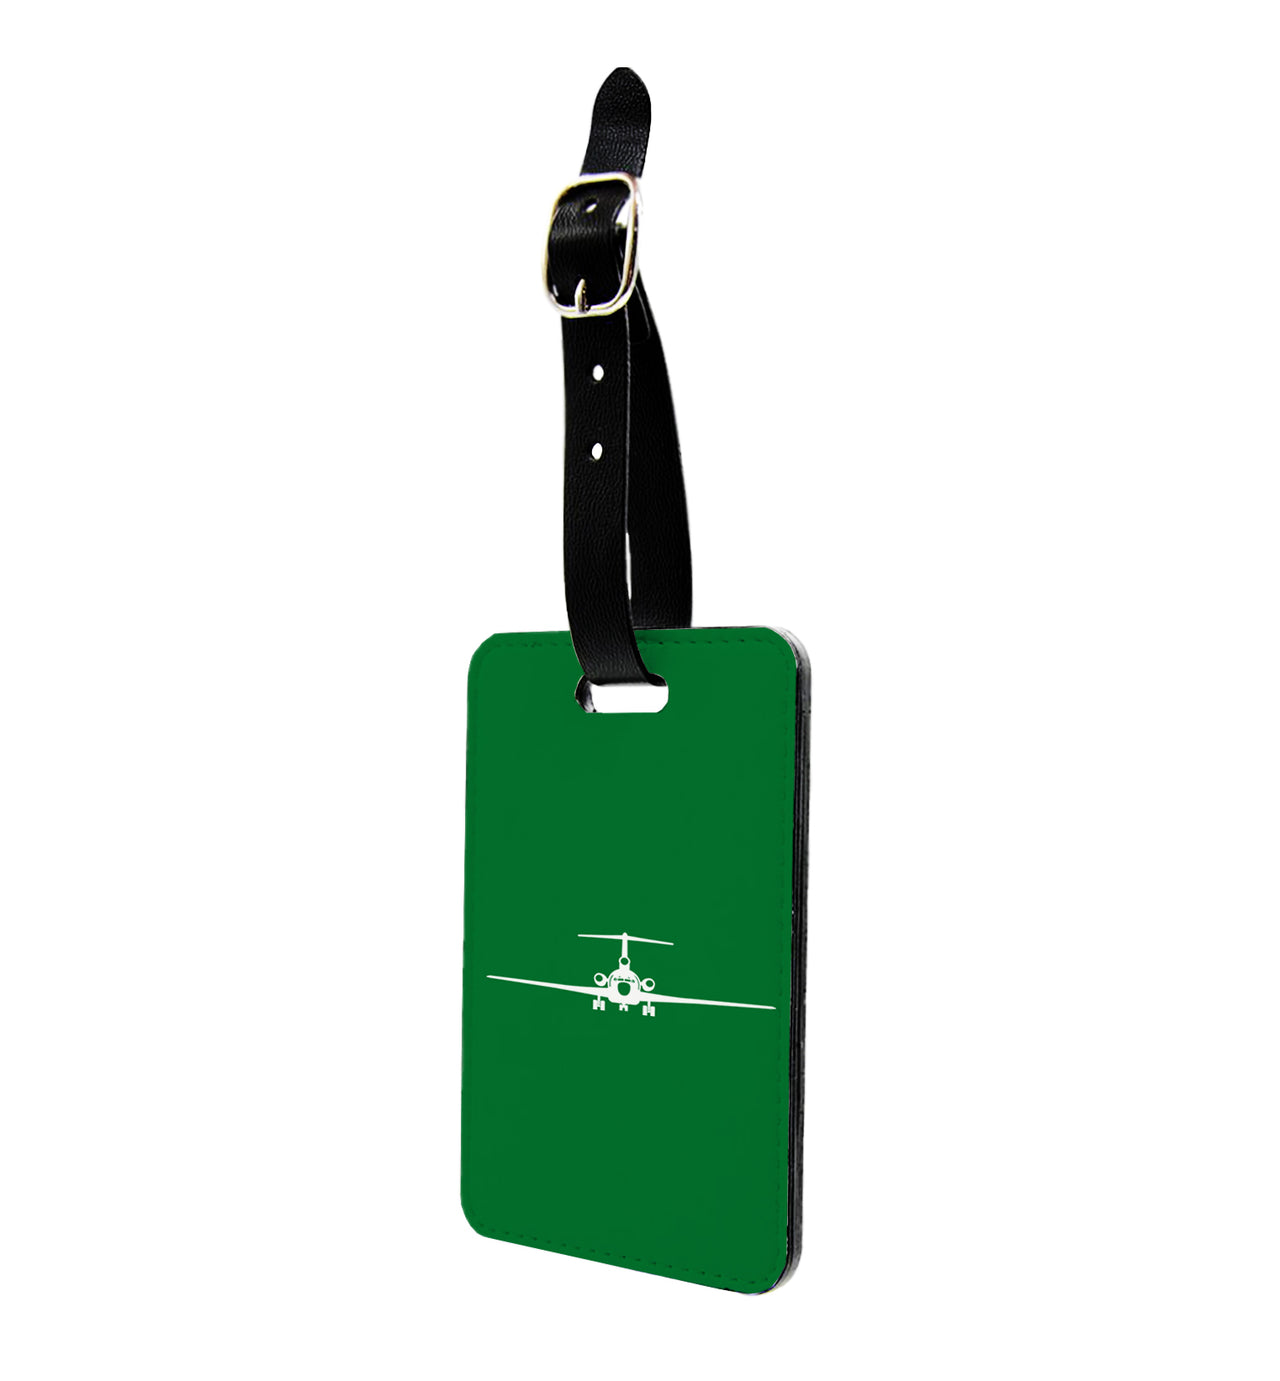 Boeing 727 Silhouette Designed Luggage Tag